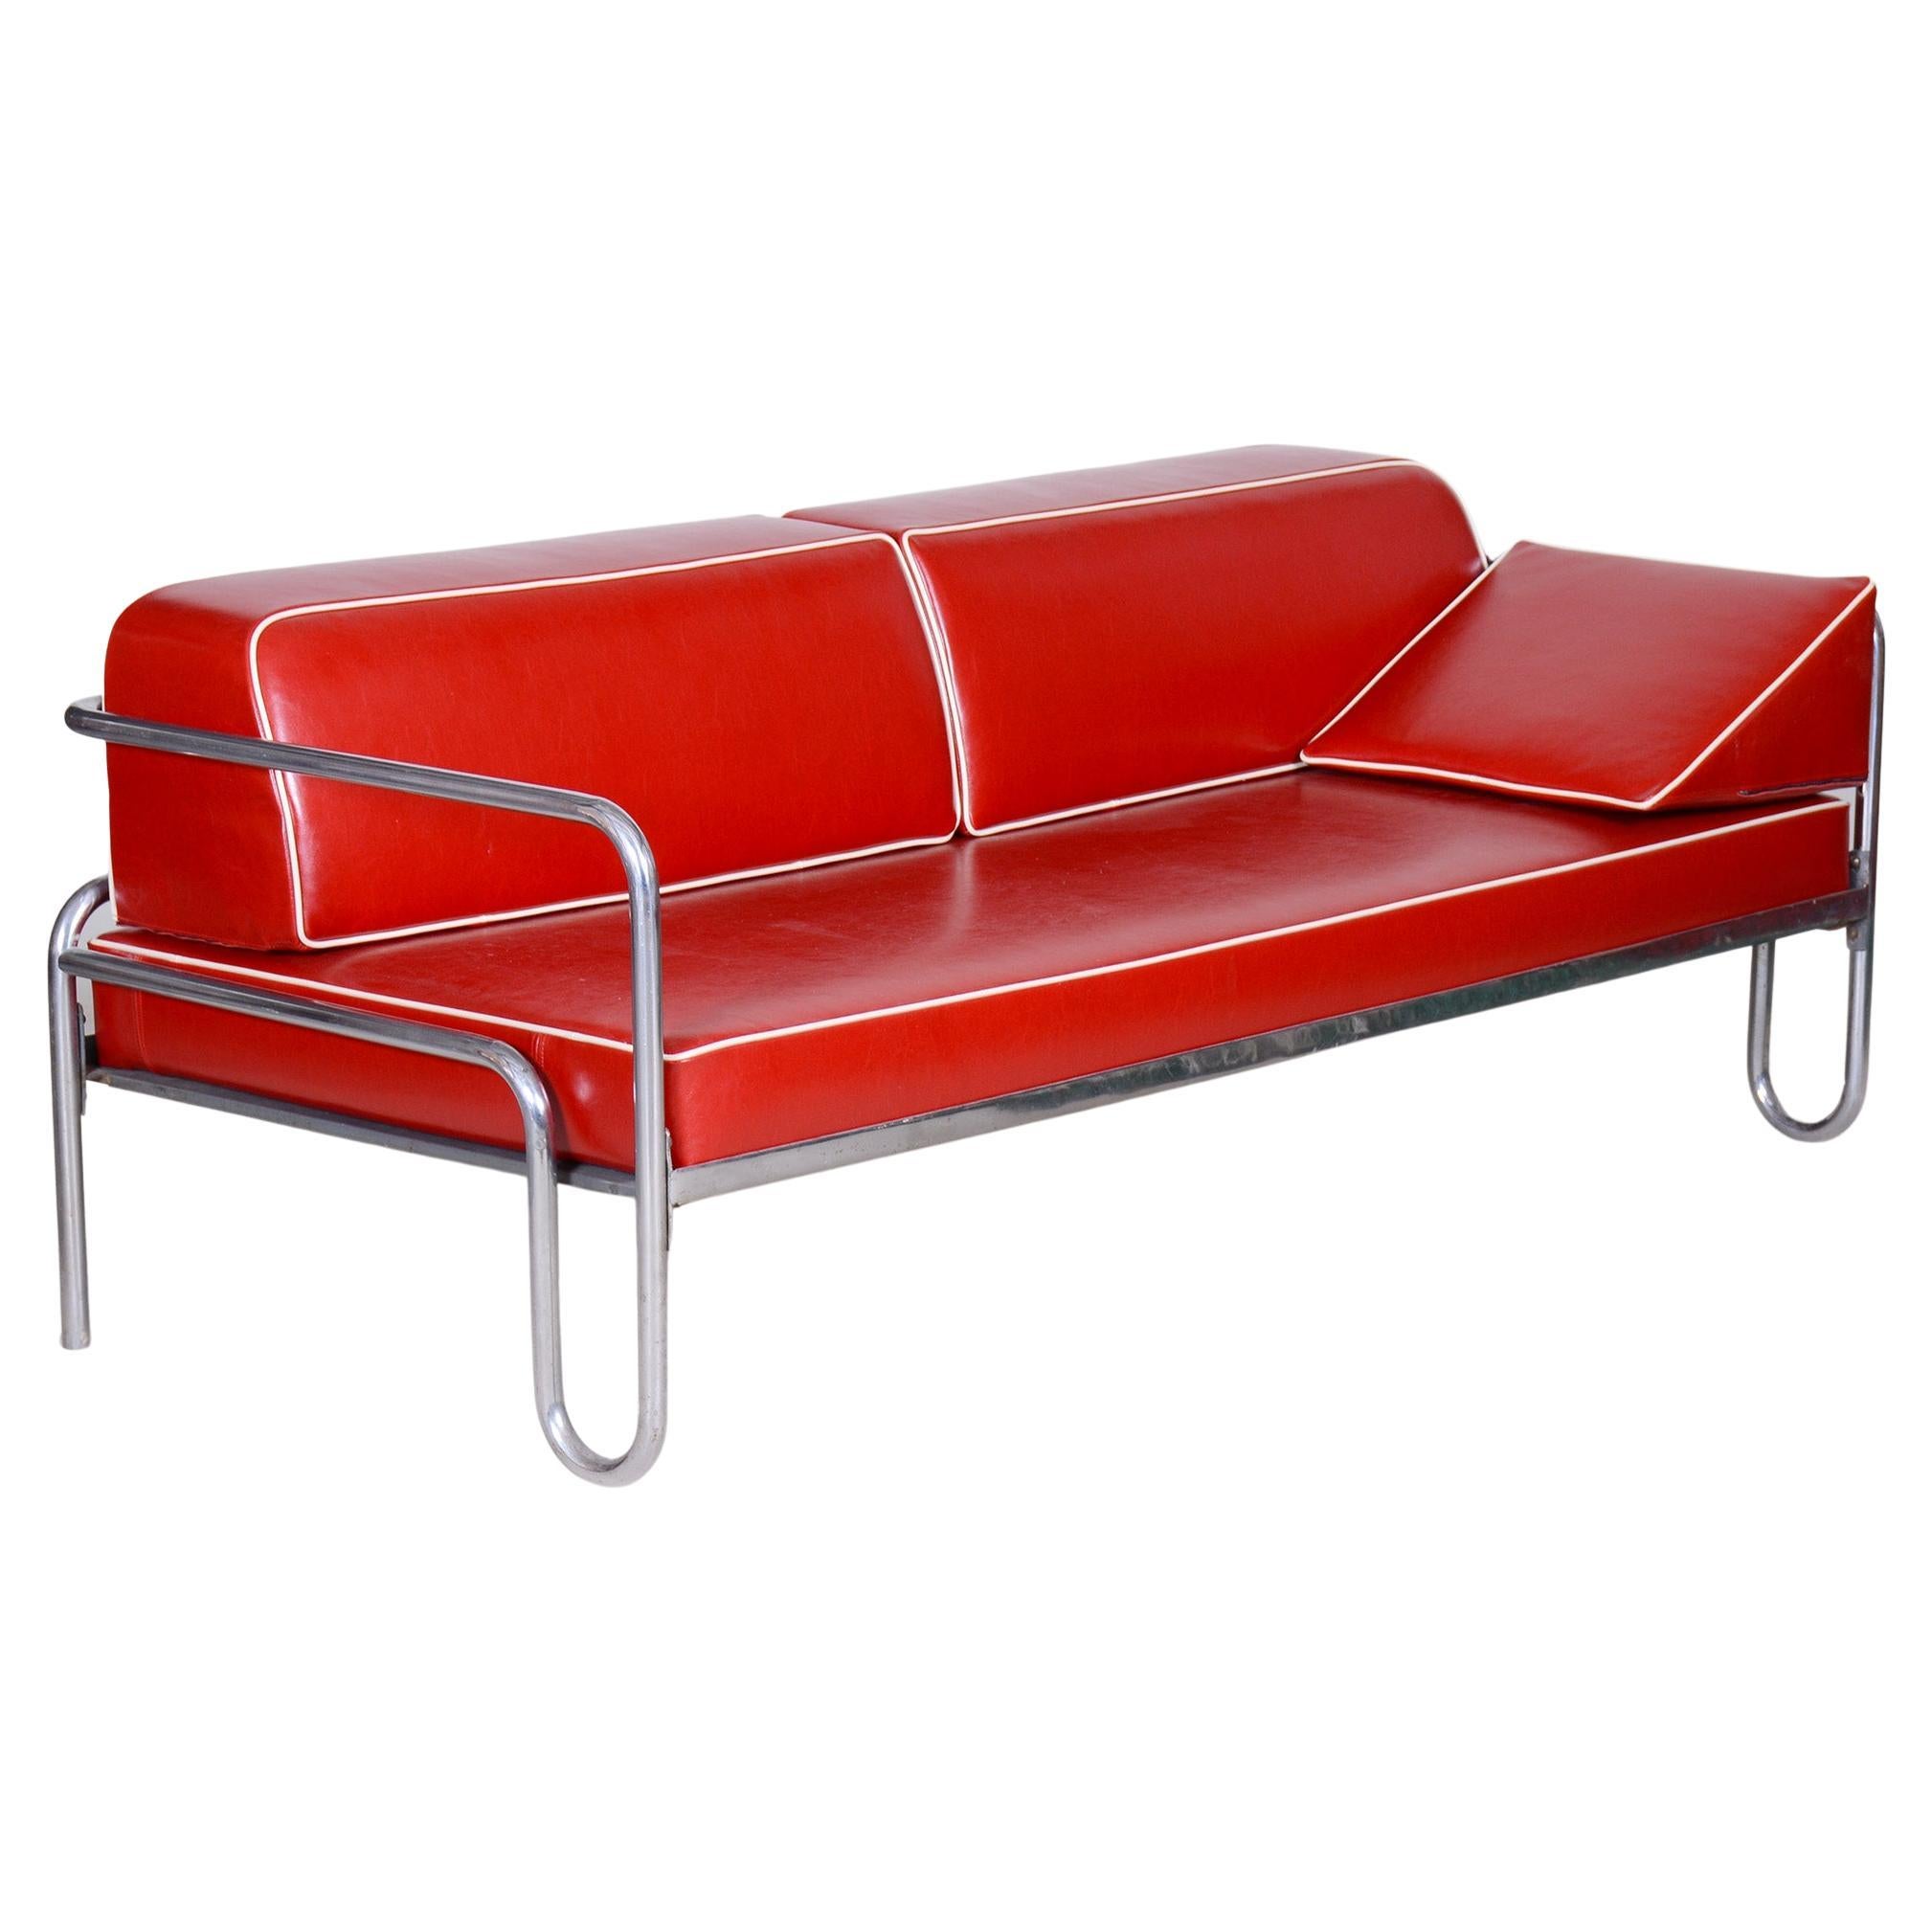 Fully Restored Red Bauhaus Sofa, High-Quality Leather, Tubular Chrome, 1930s For Sale